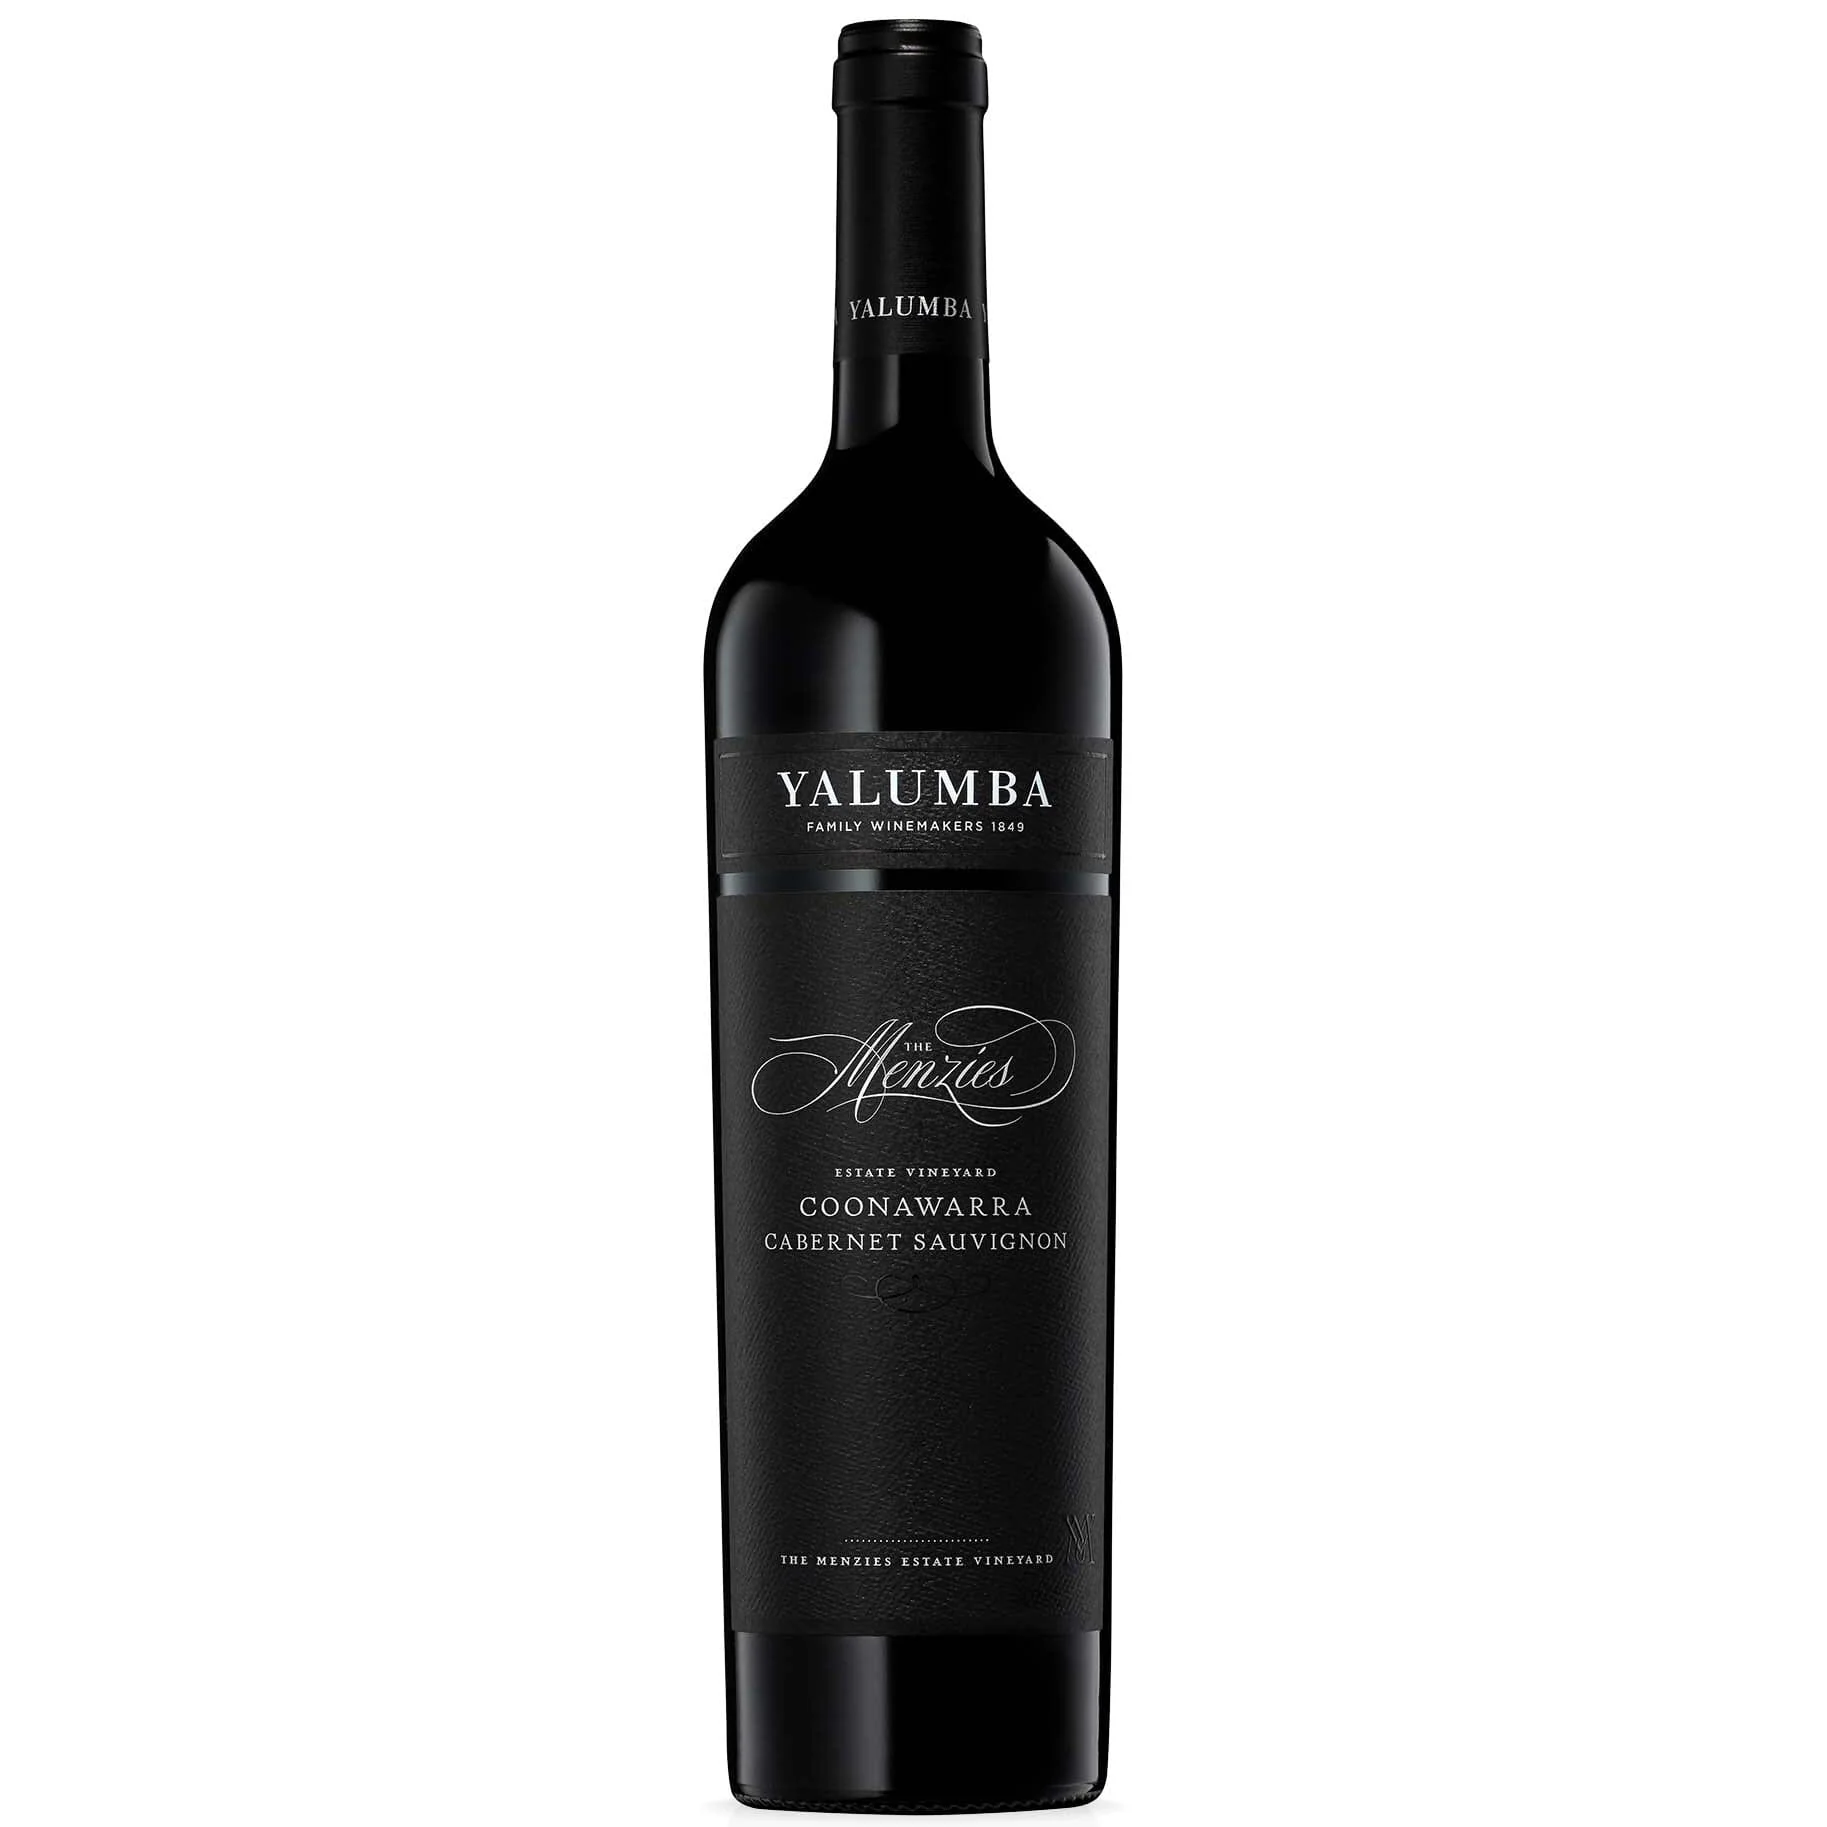 Bottle of Yalumba The Menzies Cabernet Sauvignon from search results